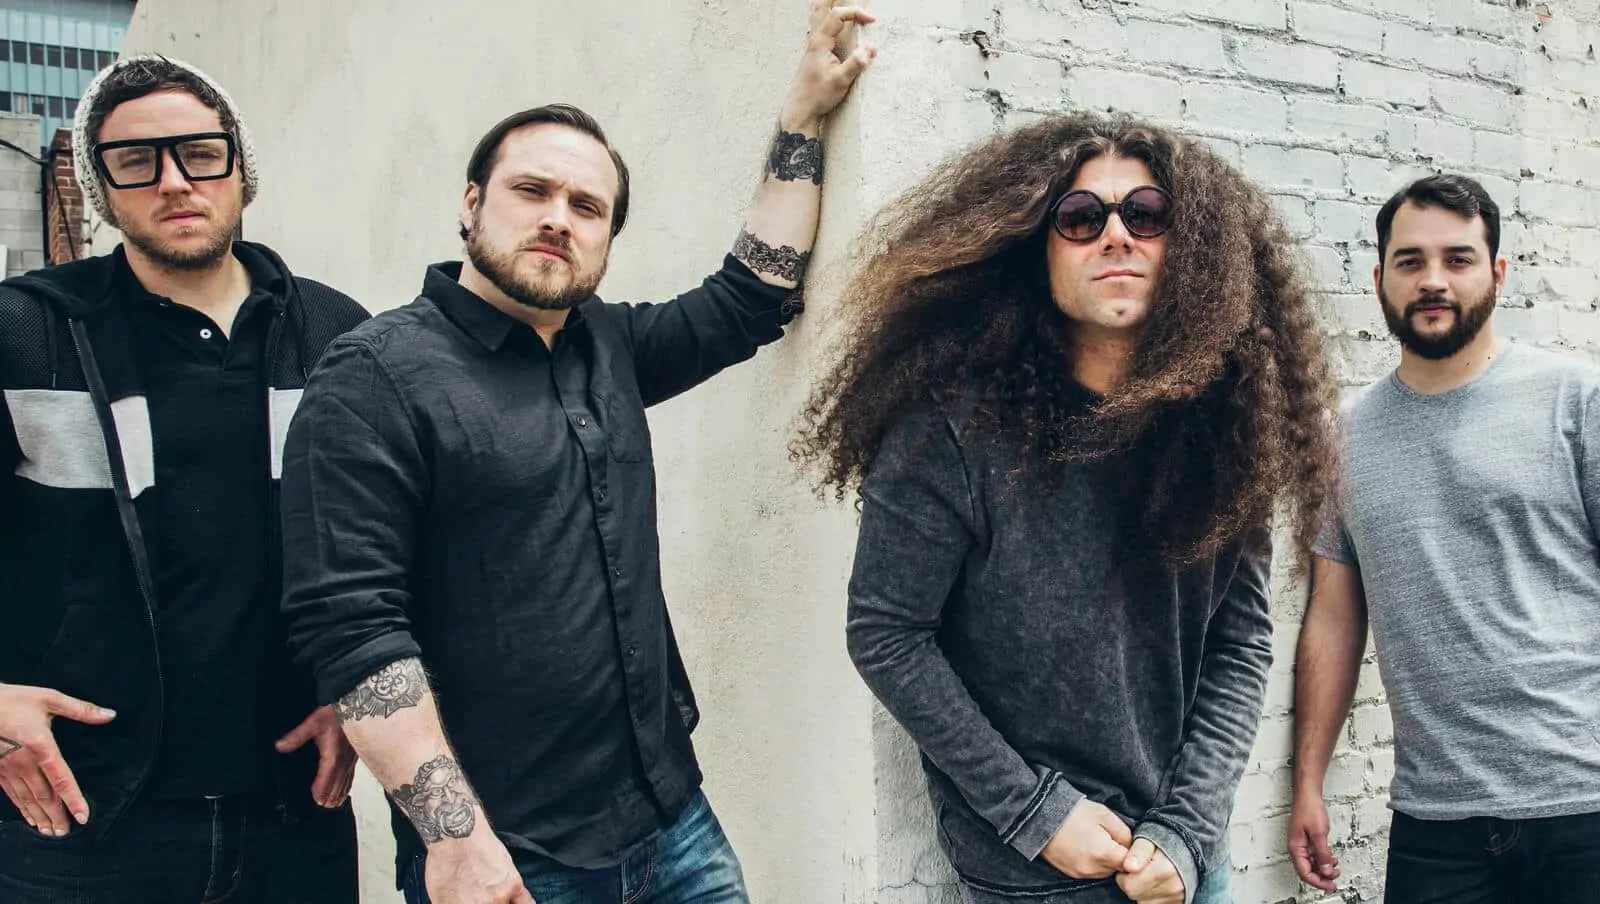 Coheed and Cambria Announces 2023 Tour Dates with Deafheaven